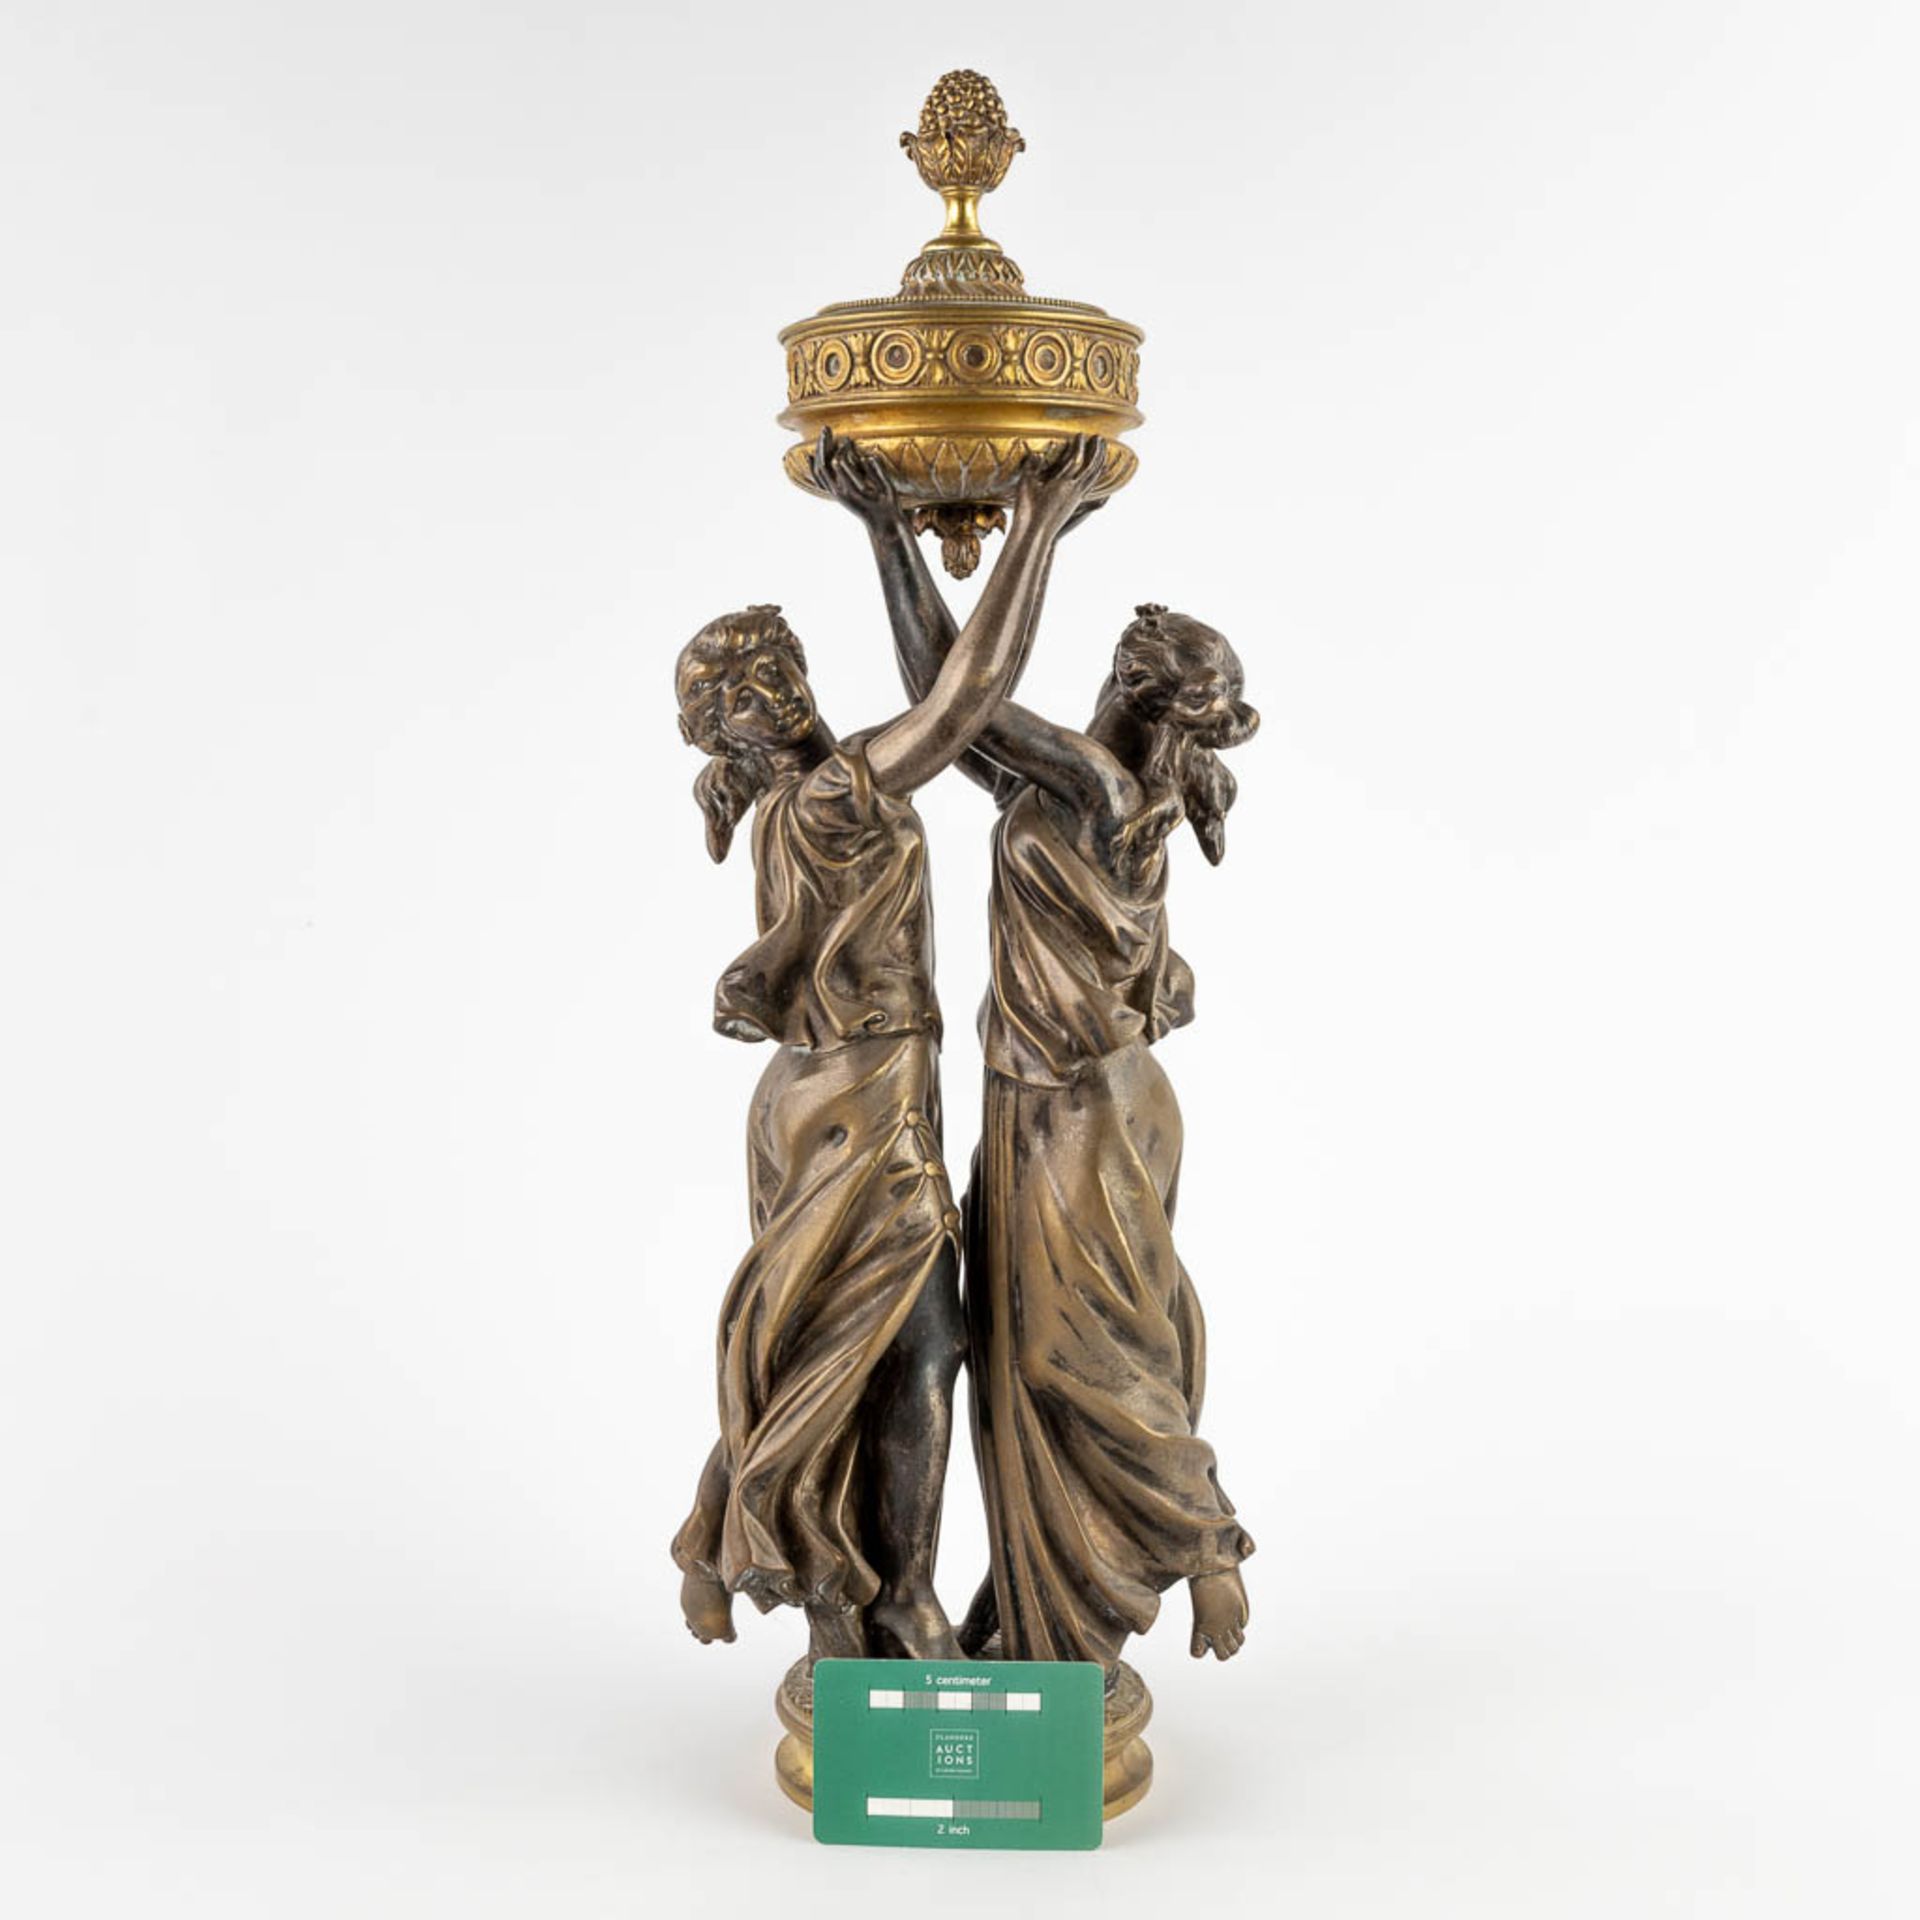 A large figurine of two graces, silver-plated and polished bronze. 19th C. (D:10 x W:18 x H:53 cm) - Image 2 of 11